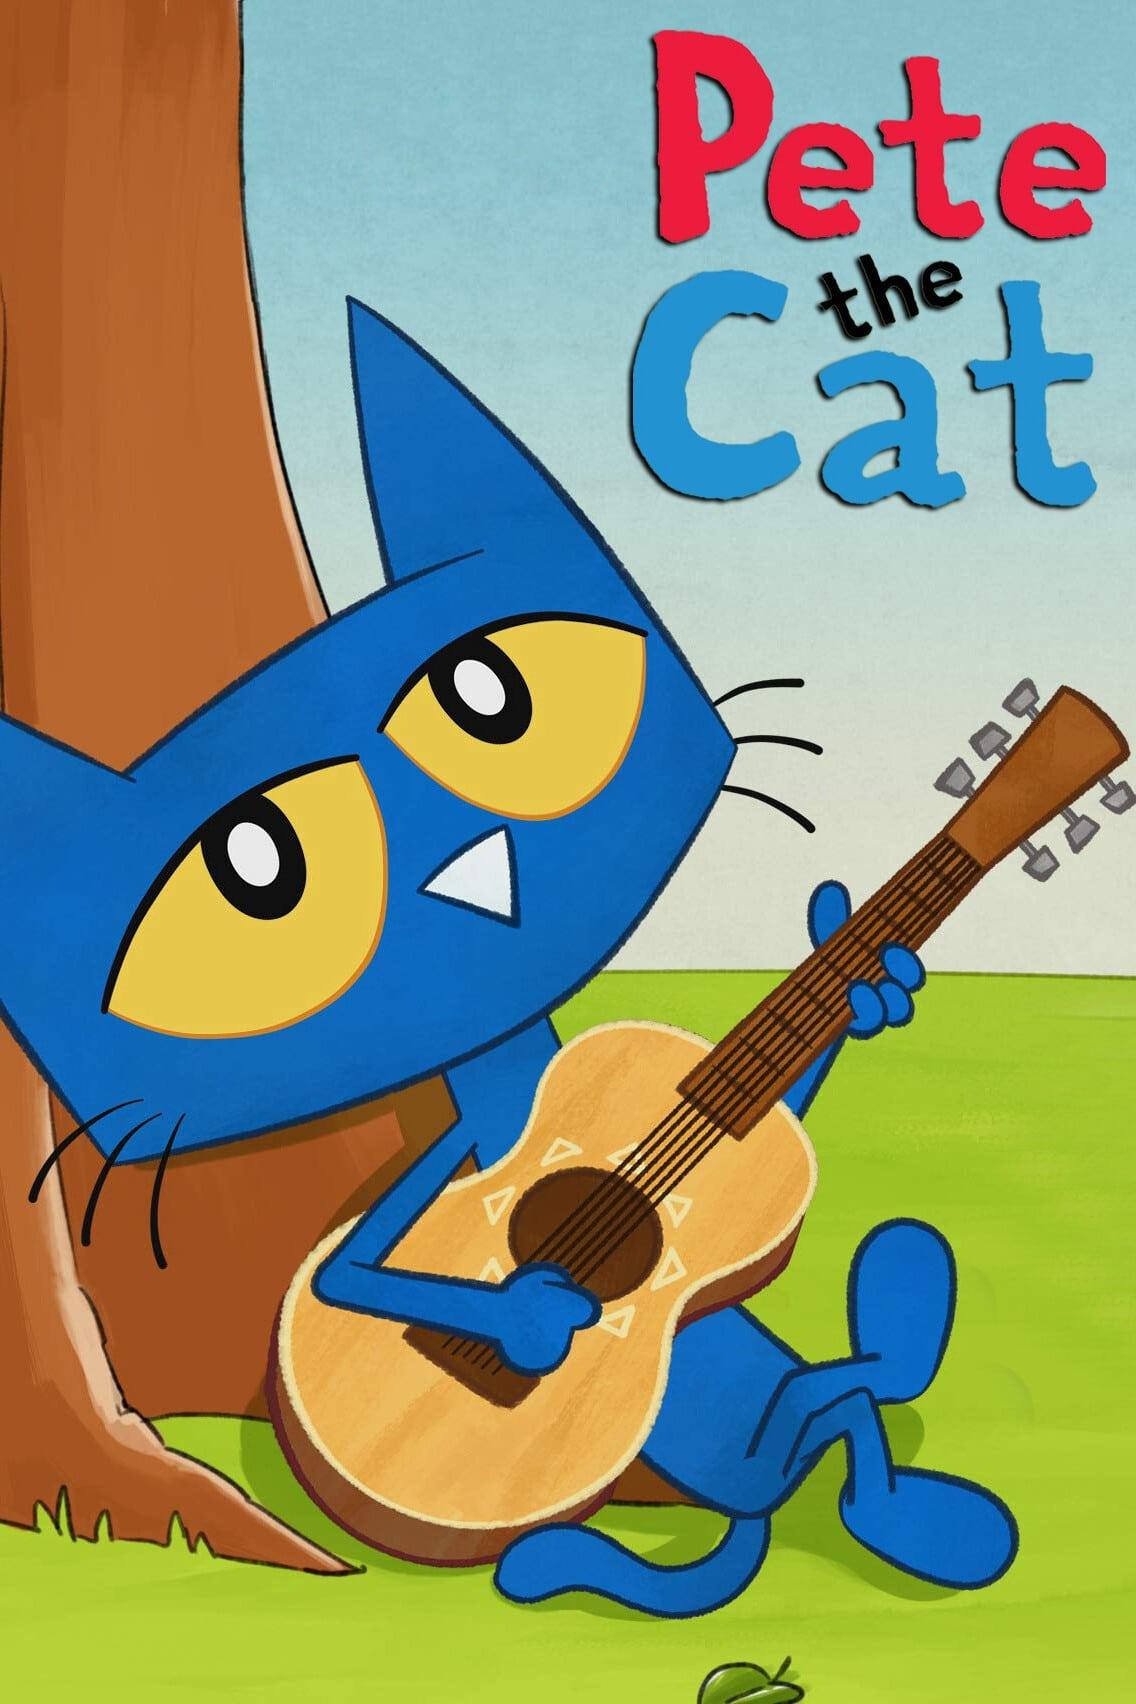 Pete the Cat poster